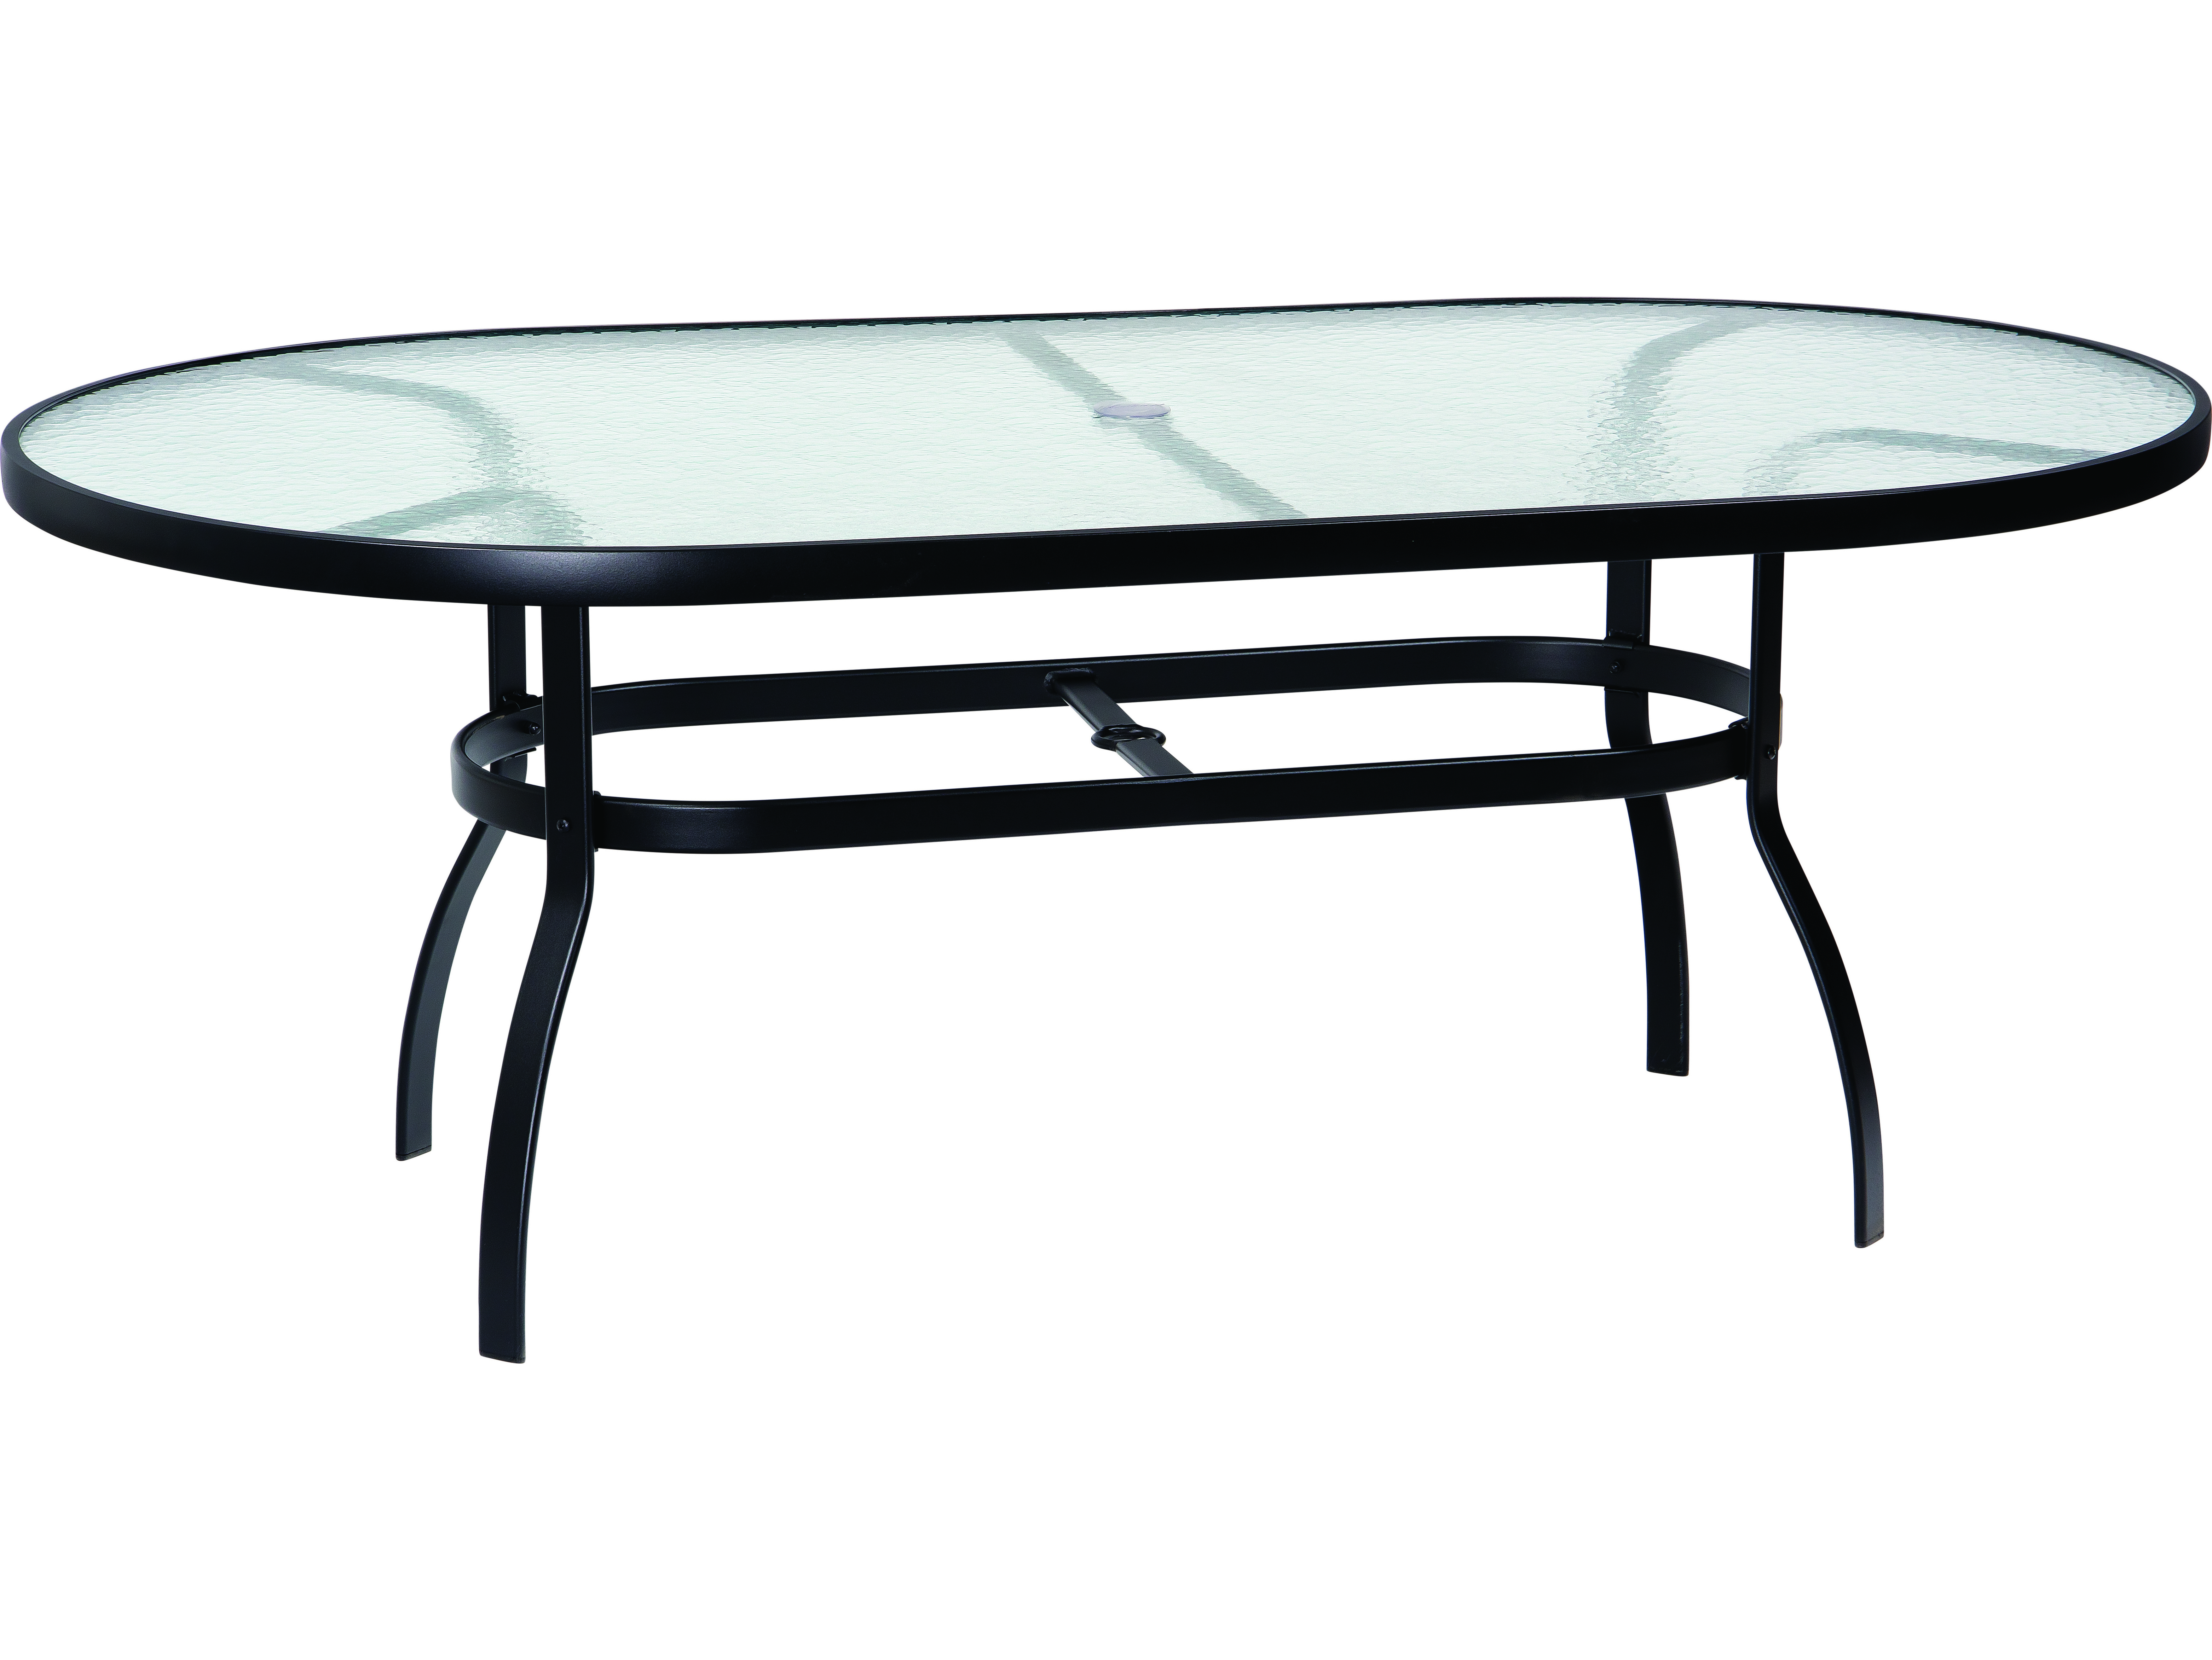 Oval Obscure Glass Top Table, Glass Top Outdoor Dining Table With Umbrella Hole